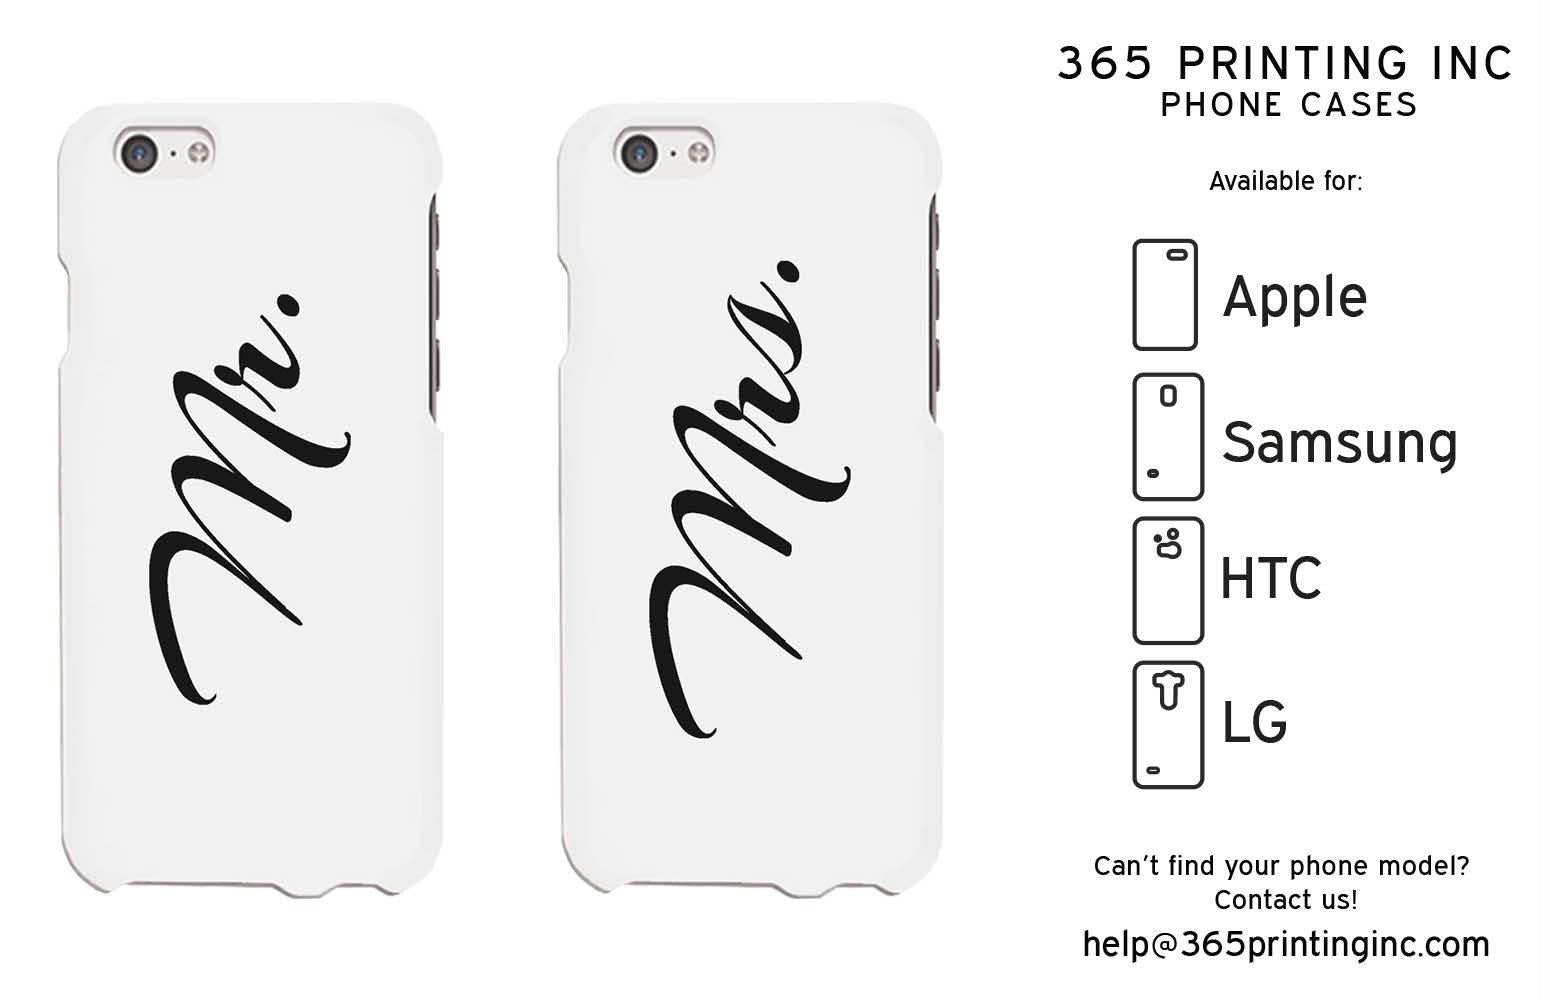 Mr and Mrs Cursive Writing White Phone Case for iPhone, Galaxy S, One M8, G3